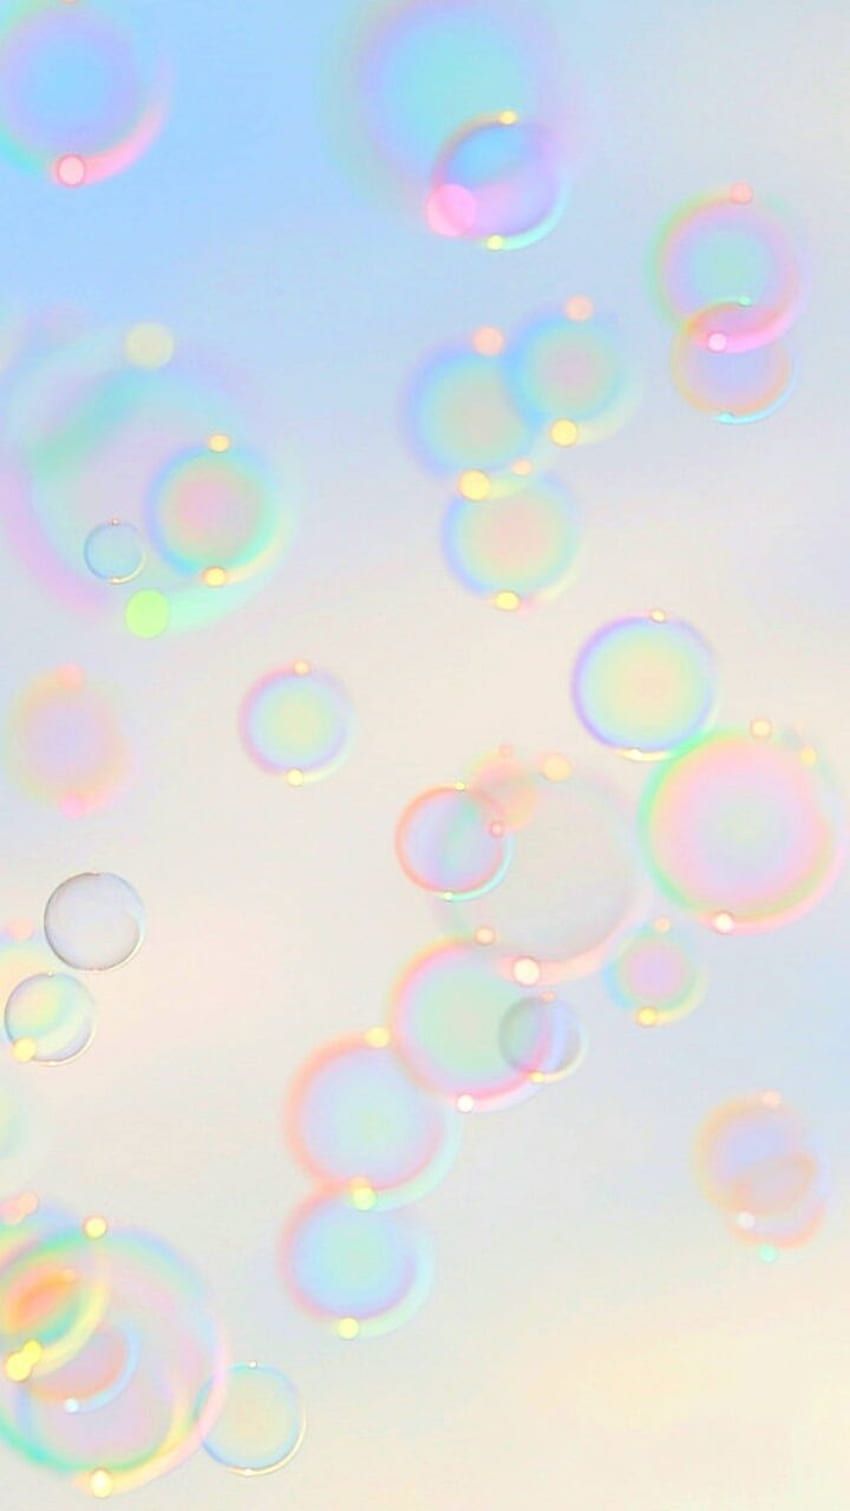 Aesthetic background of soap bubbles on a white background - Bubbles